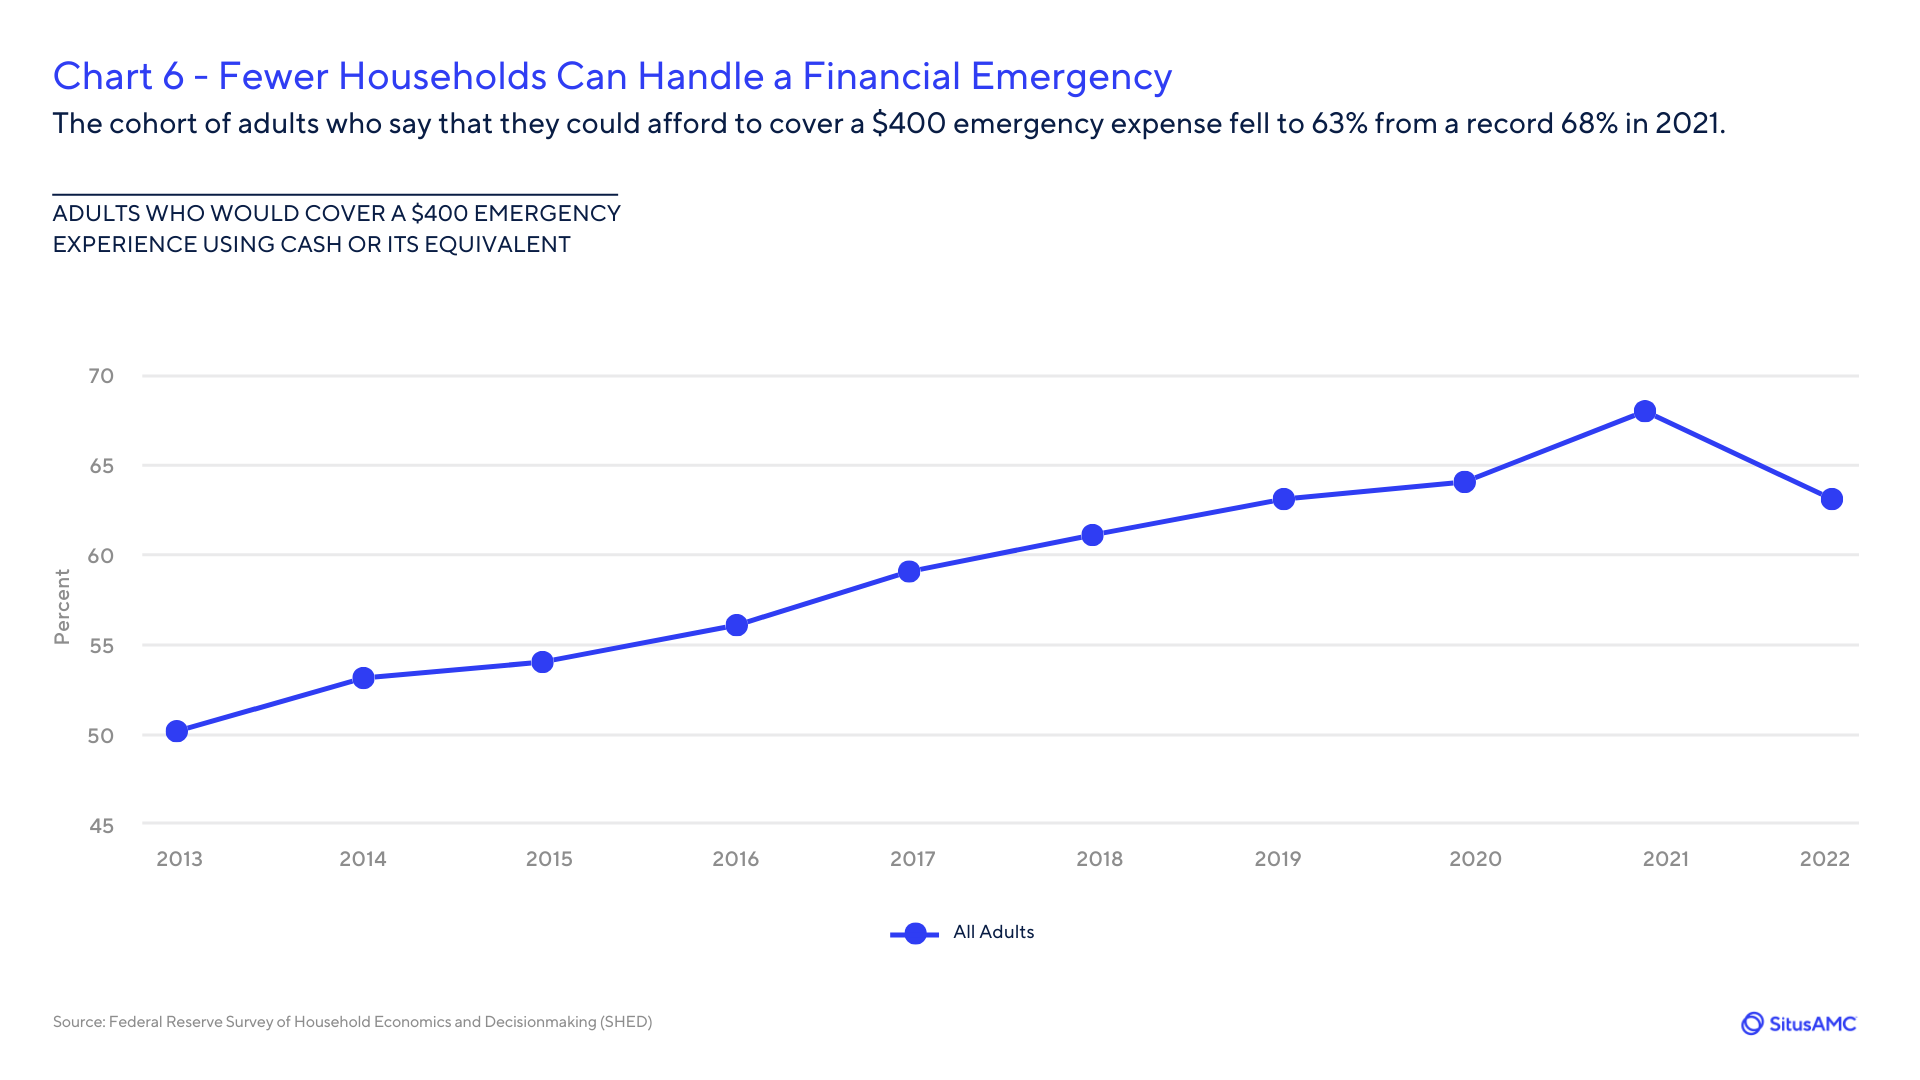 Fewer Households can Handle a Financial Emergency